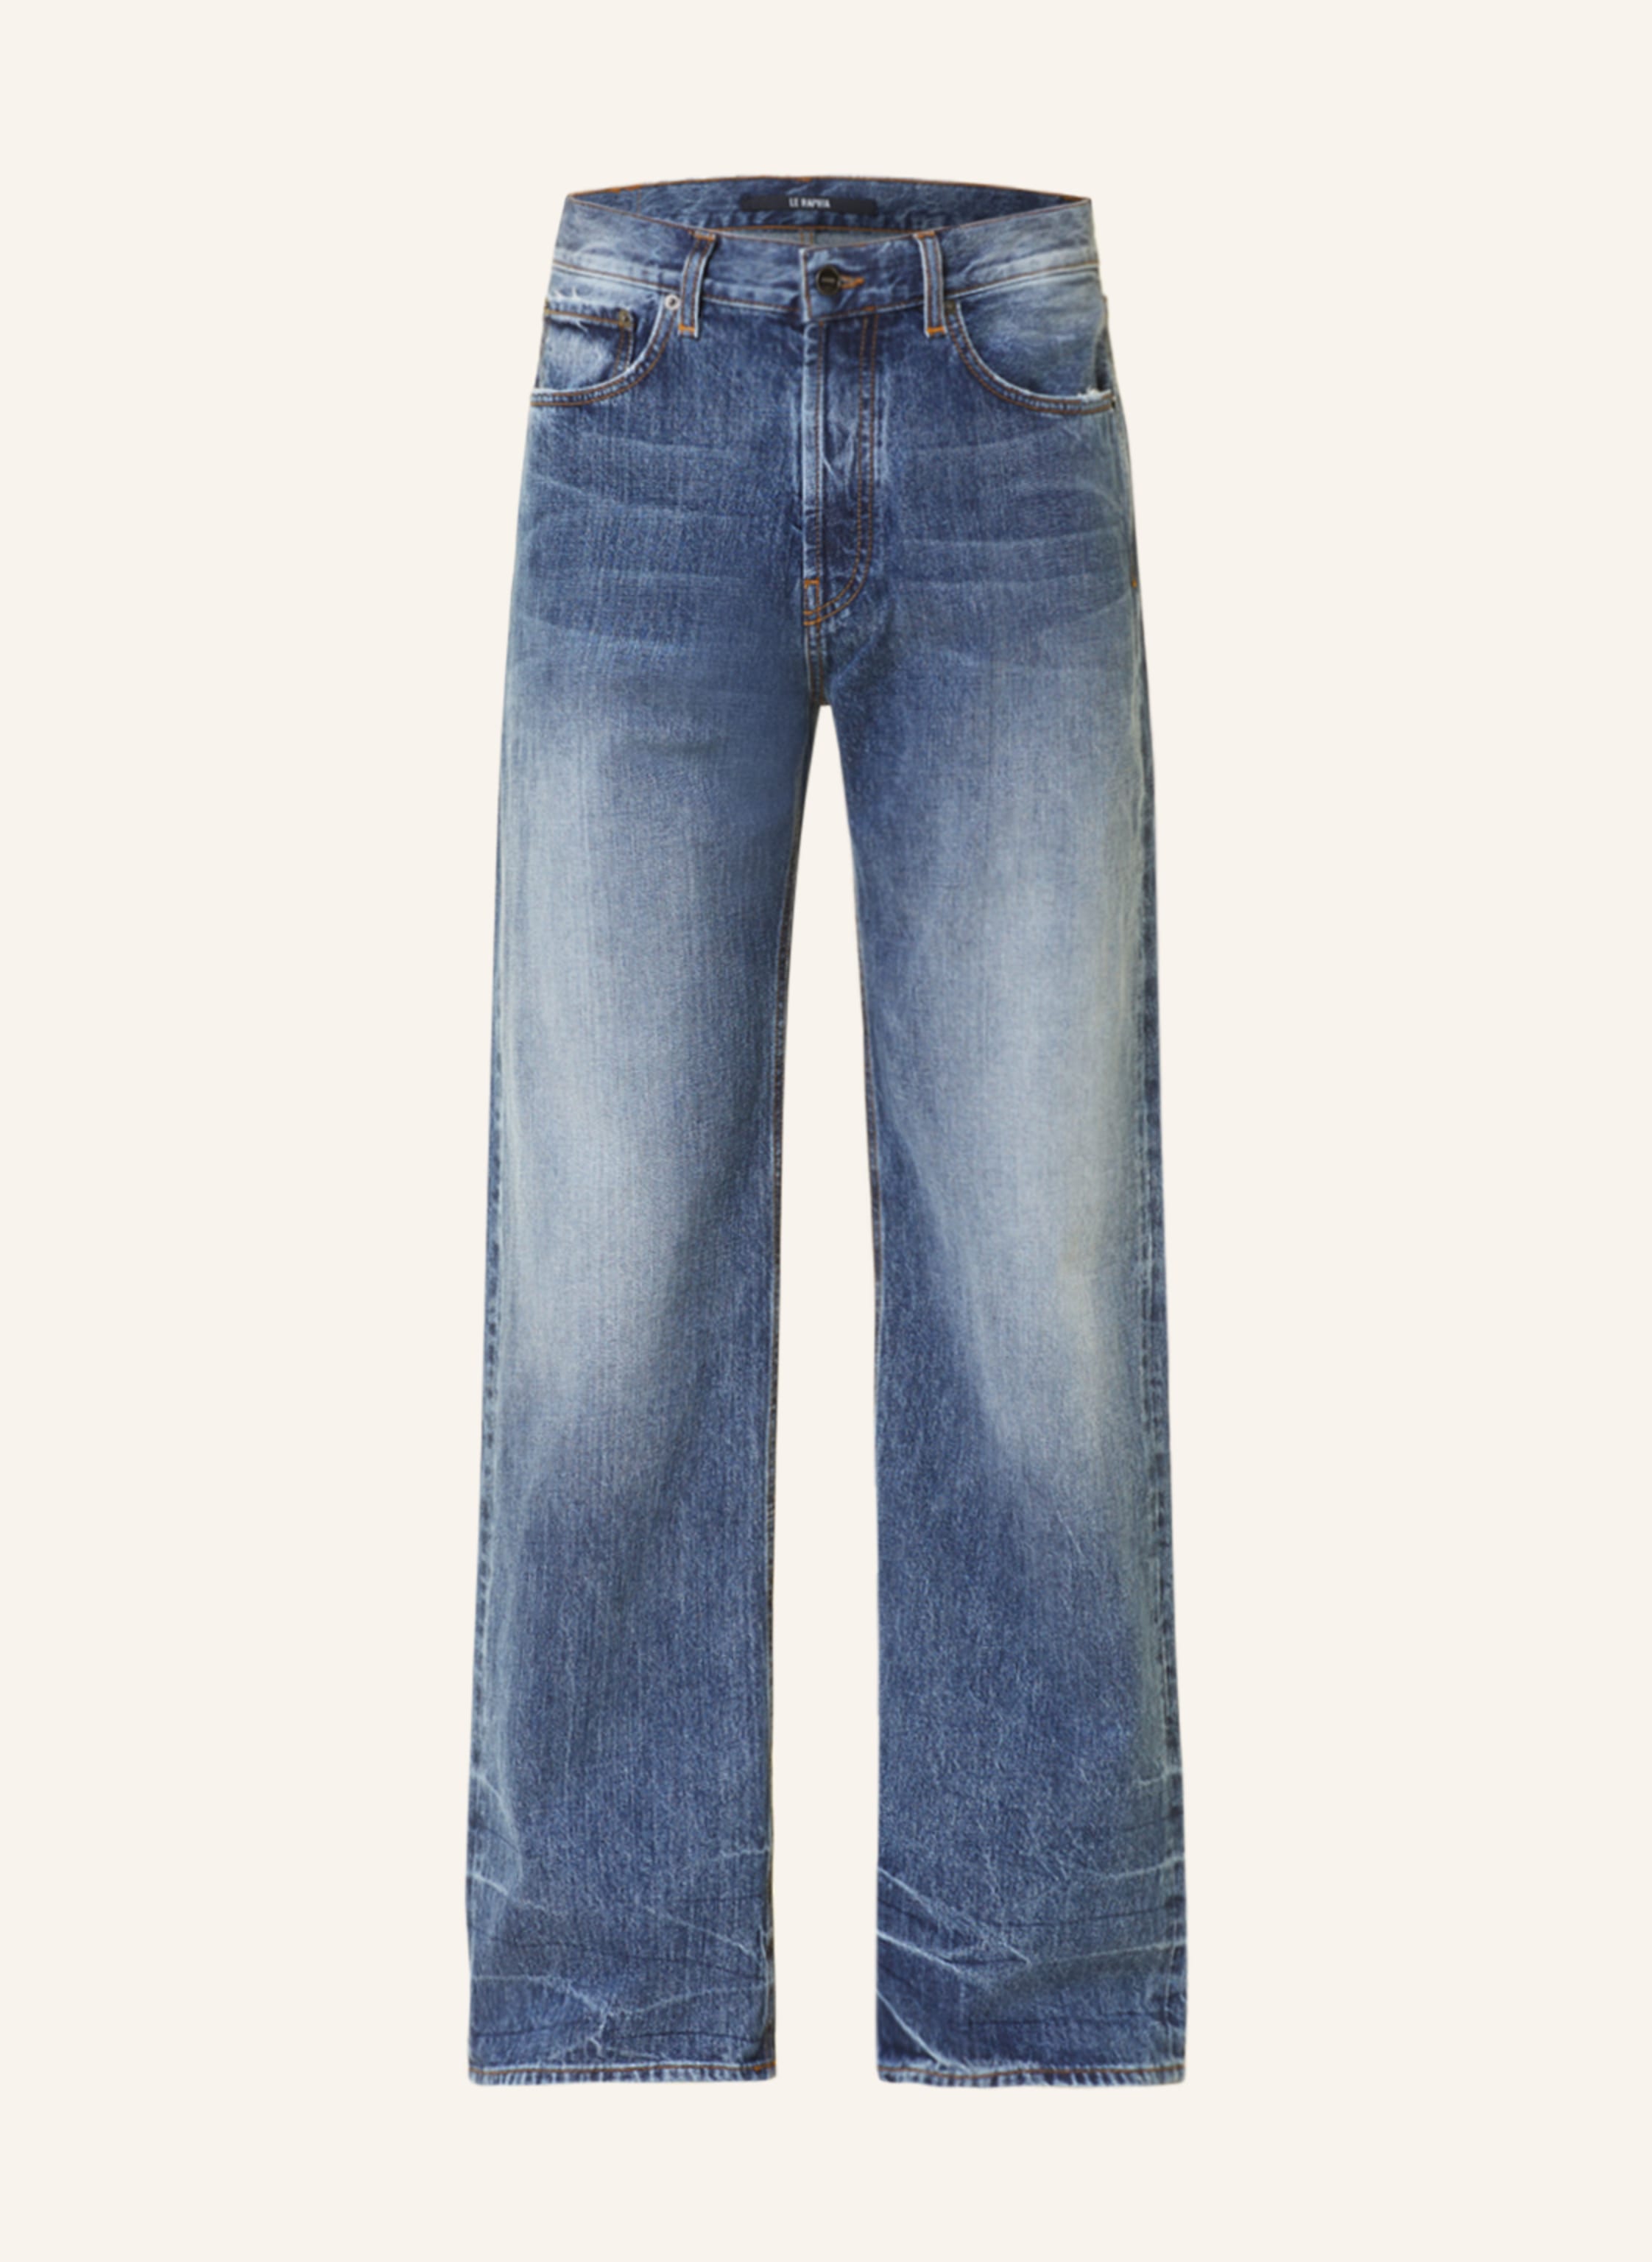 JACQUEMUS Jeans LE DE-NIMES SUNO straight fit in 33b blue/tabac